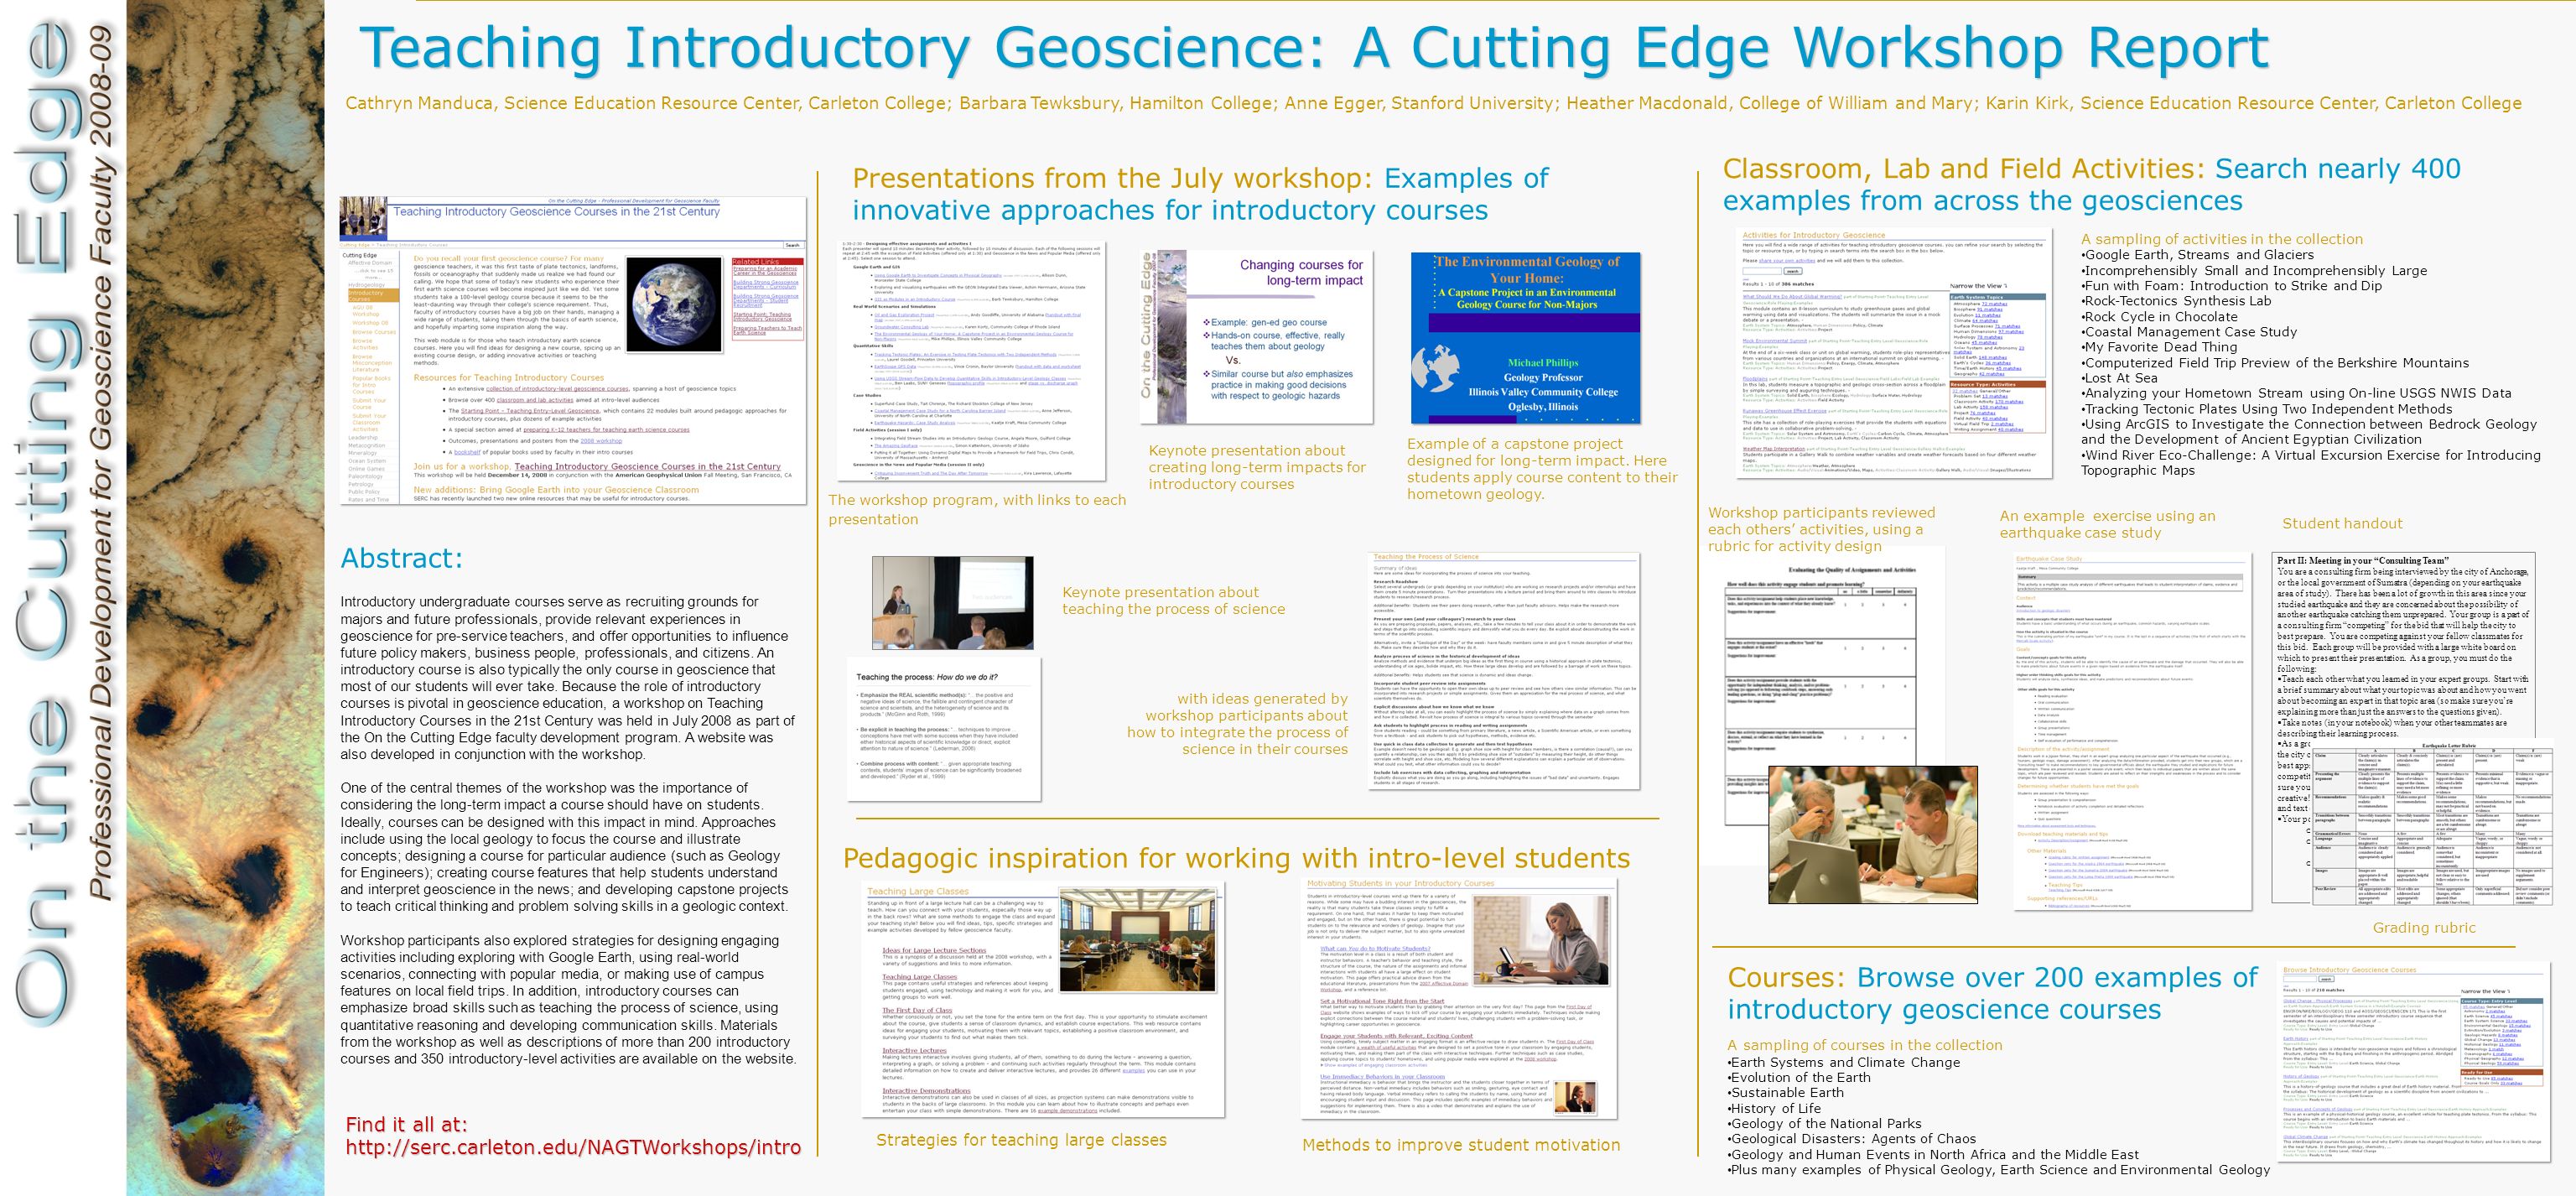 Teaching Introductory Geoscience: A Cutting Edge Workshop Report Cathryn Manduca, Science Education Resource Center, Carleton College; Barbara Tewksbury, Hamilton College; Anne Egger, Stanford University; Heather Macdonald, College of William and Mary; Karin Kirk, Science Education Resource Center, Carleton College Find it all at:   Abstract: Introductory undergraduate courses serve as recruiting grounds for majors and future professionals, provide relevant experiences in geoscience for pre-service teachers, and offer opportunities to influence future policy makers, business people, professionals, and citizens.